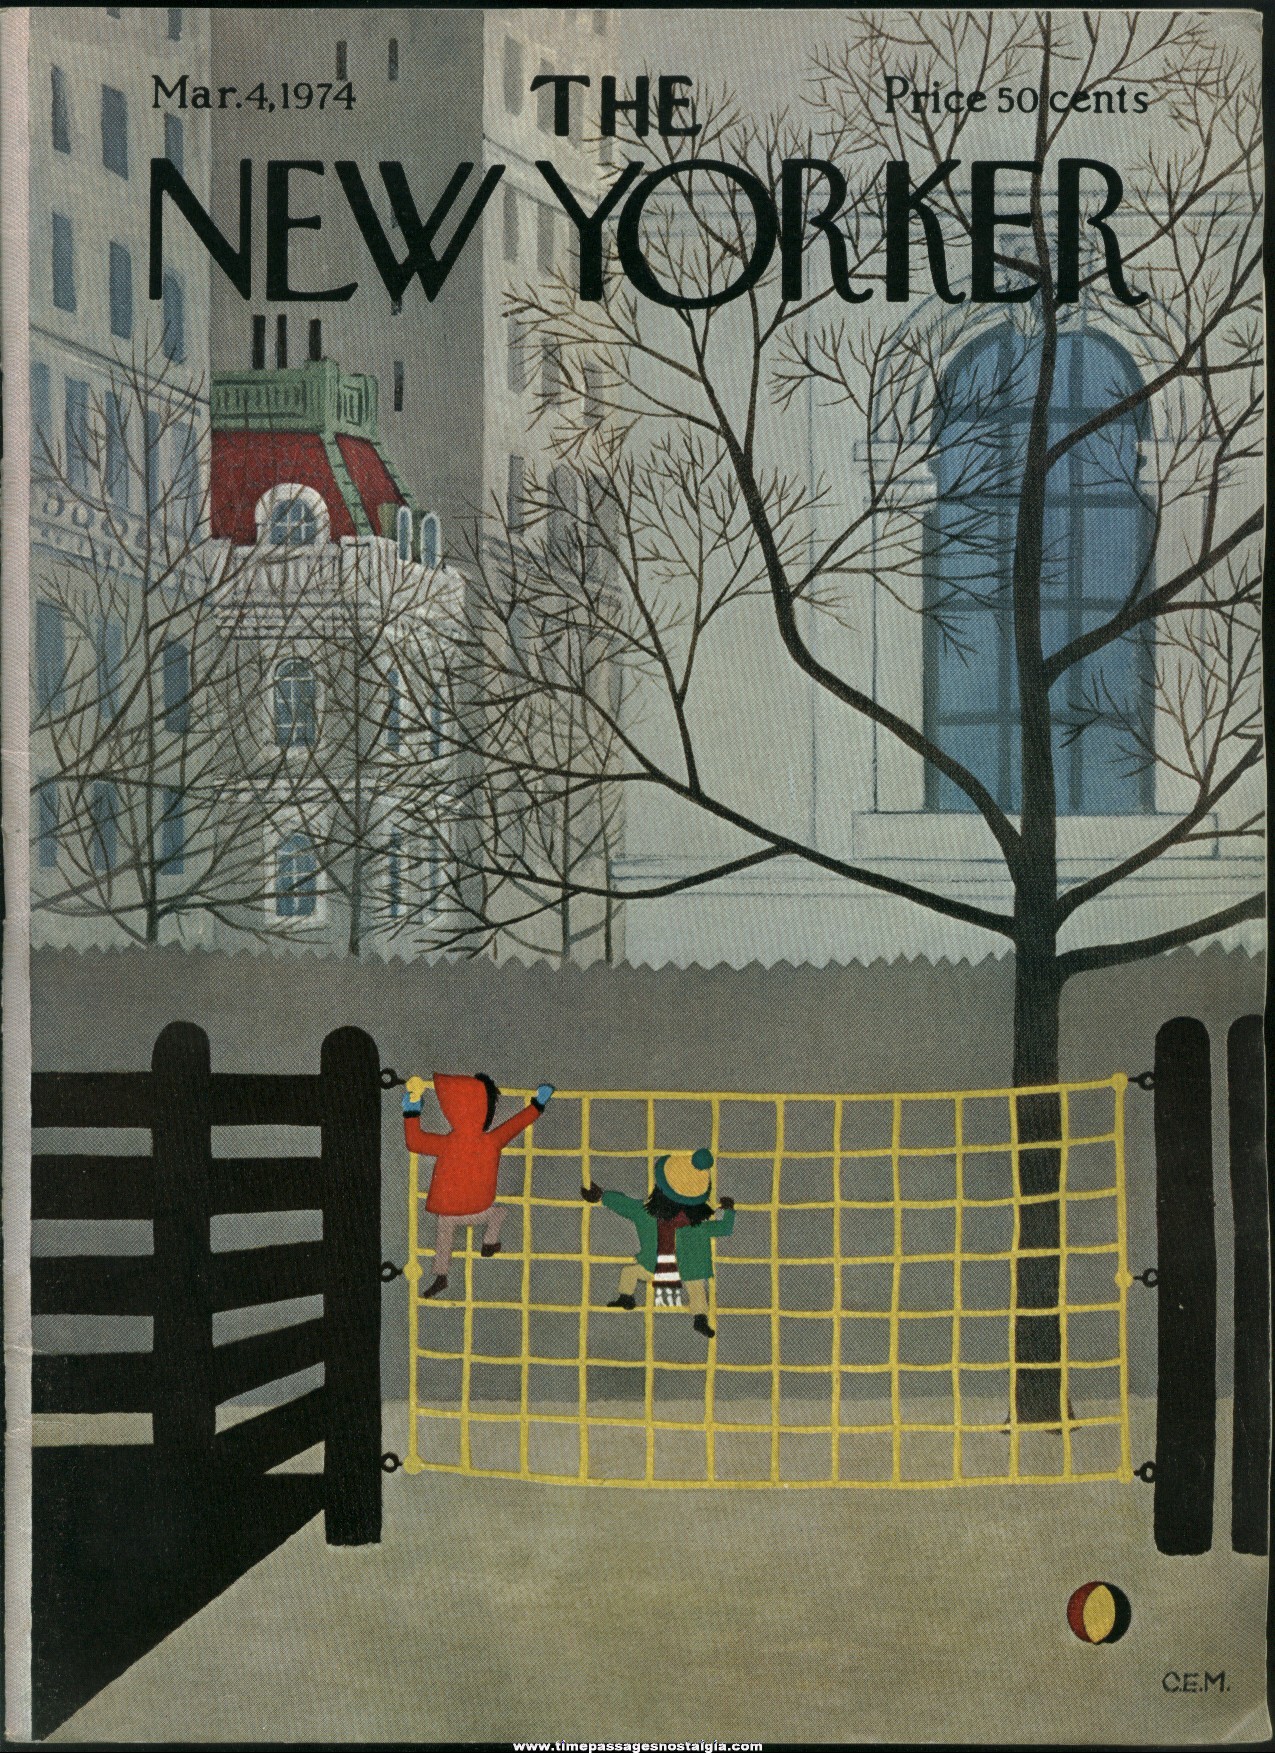 New Yorker Magazine - March 4, 1974 - Cover by Charles E. Martin